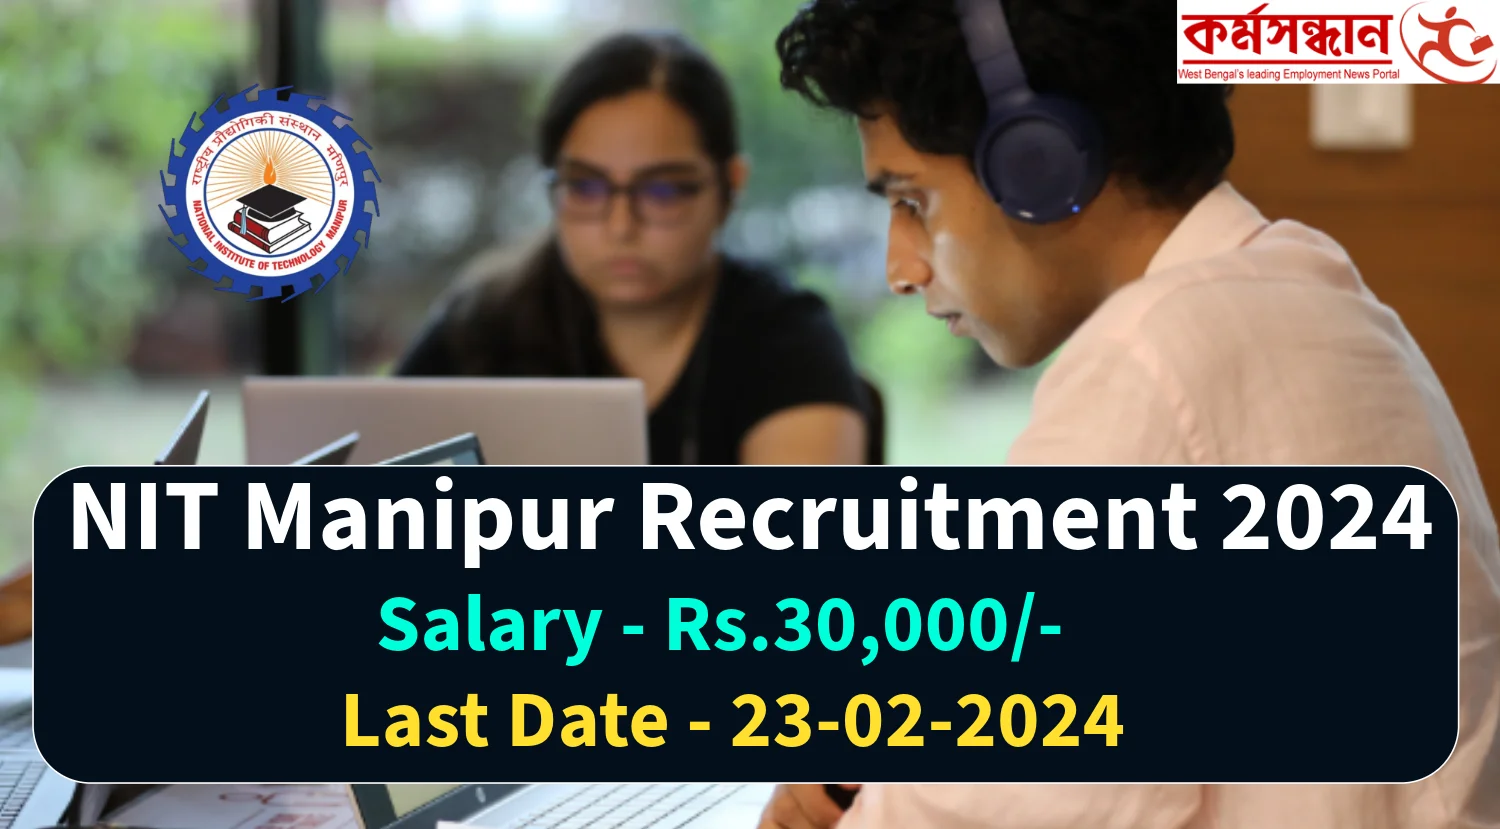 NIT Manipur Recruitment 2024 for JRF Posts